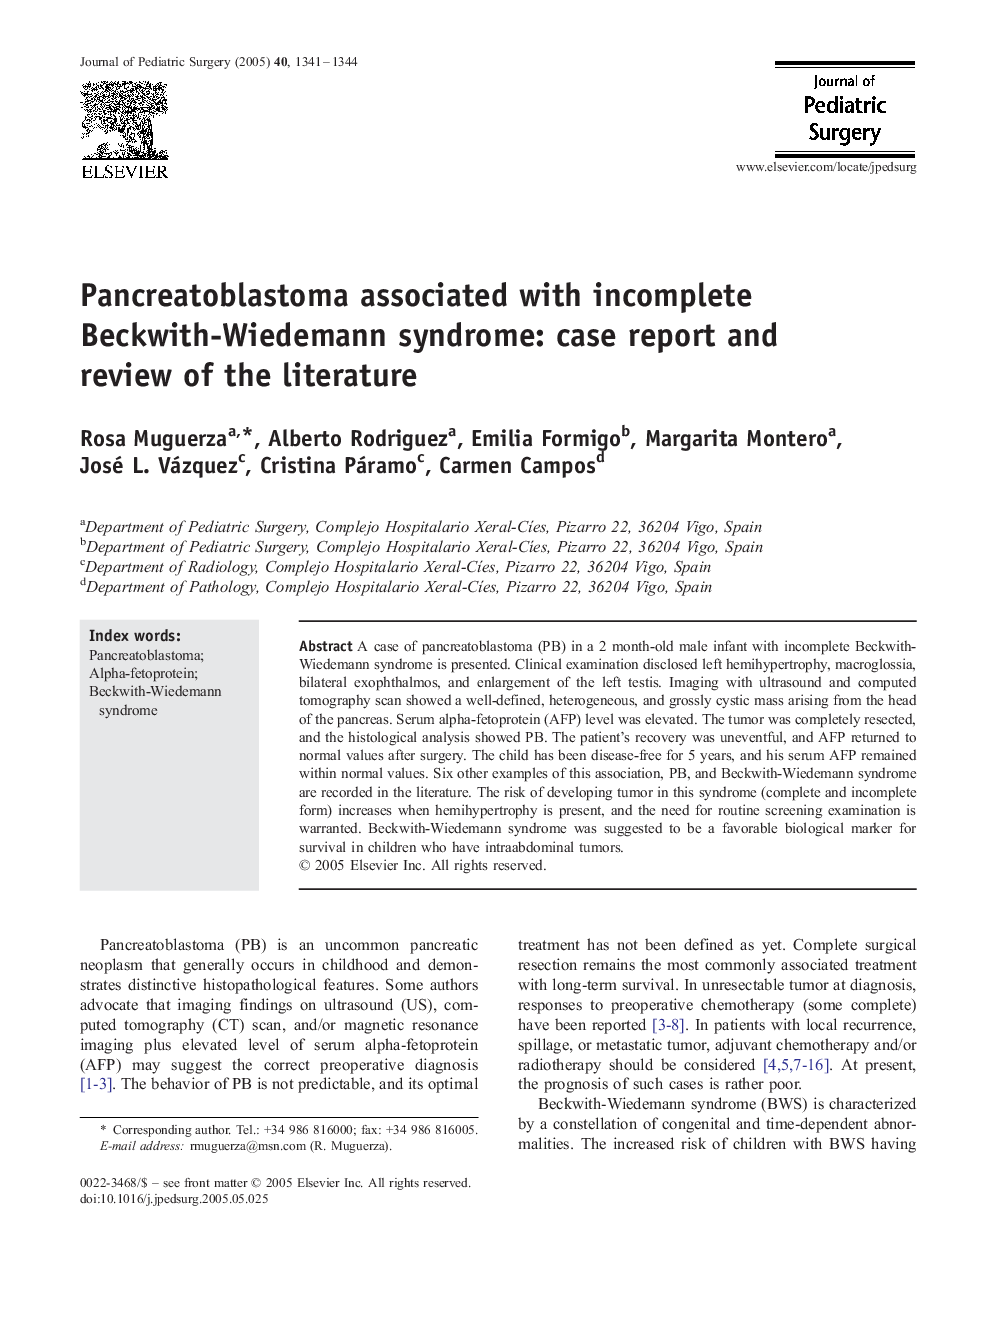 Pancreatoblastoma associated with incomplete Beckwith-Wiedemann syndrome: case report and review of the literature